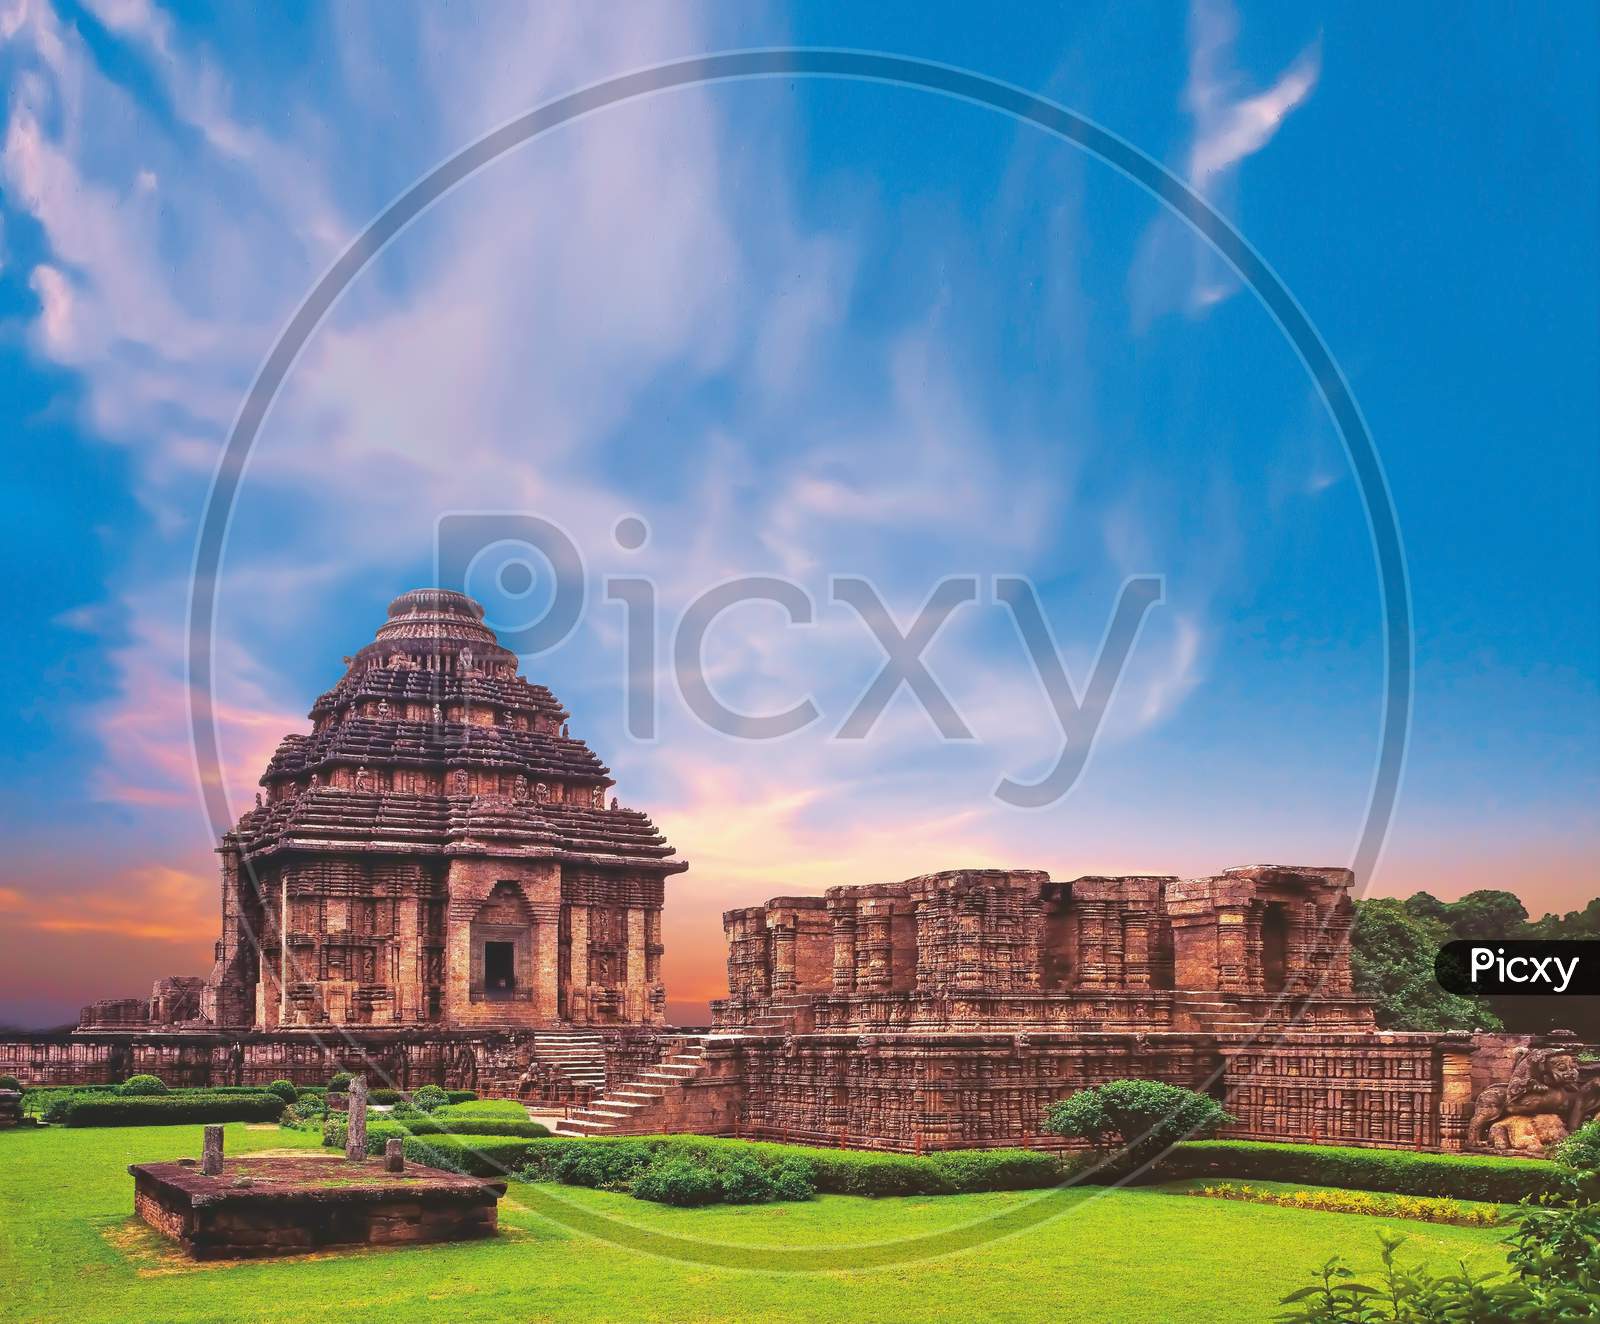 India Sun Temple, Konark, Odisha. A Masterpiece Of Odishan Temple Architecture And A World Heritage Monument. A Repository Of Art Forms And Culmination Of Kalinga School Of Temple Architecture.